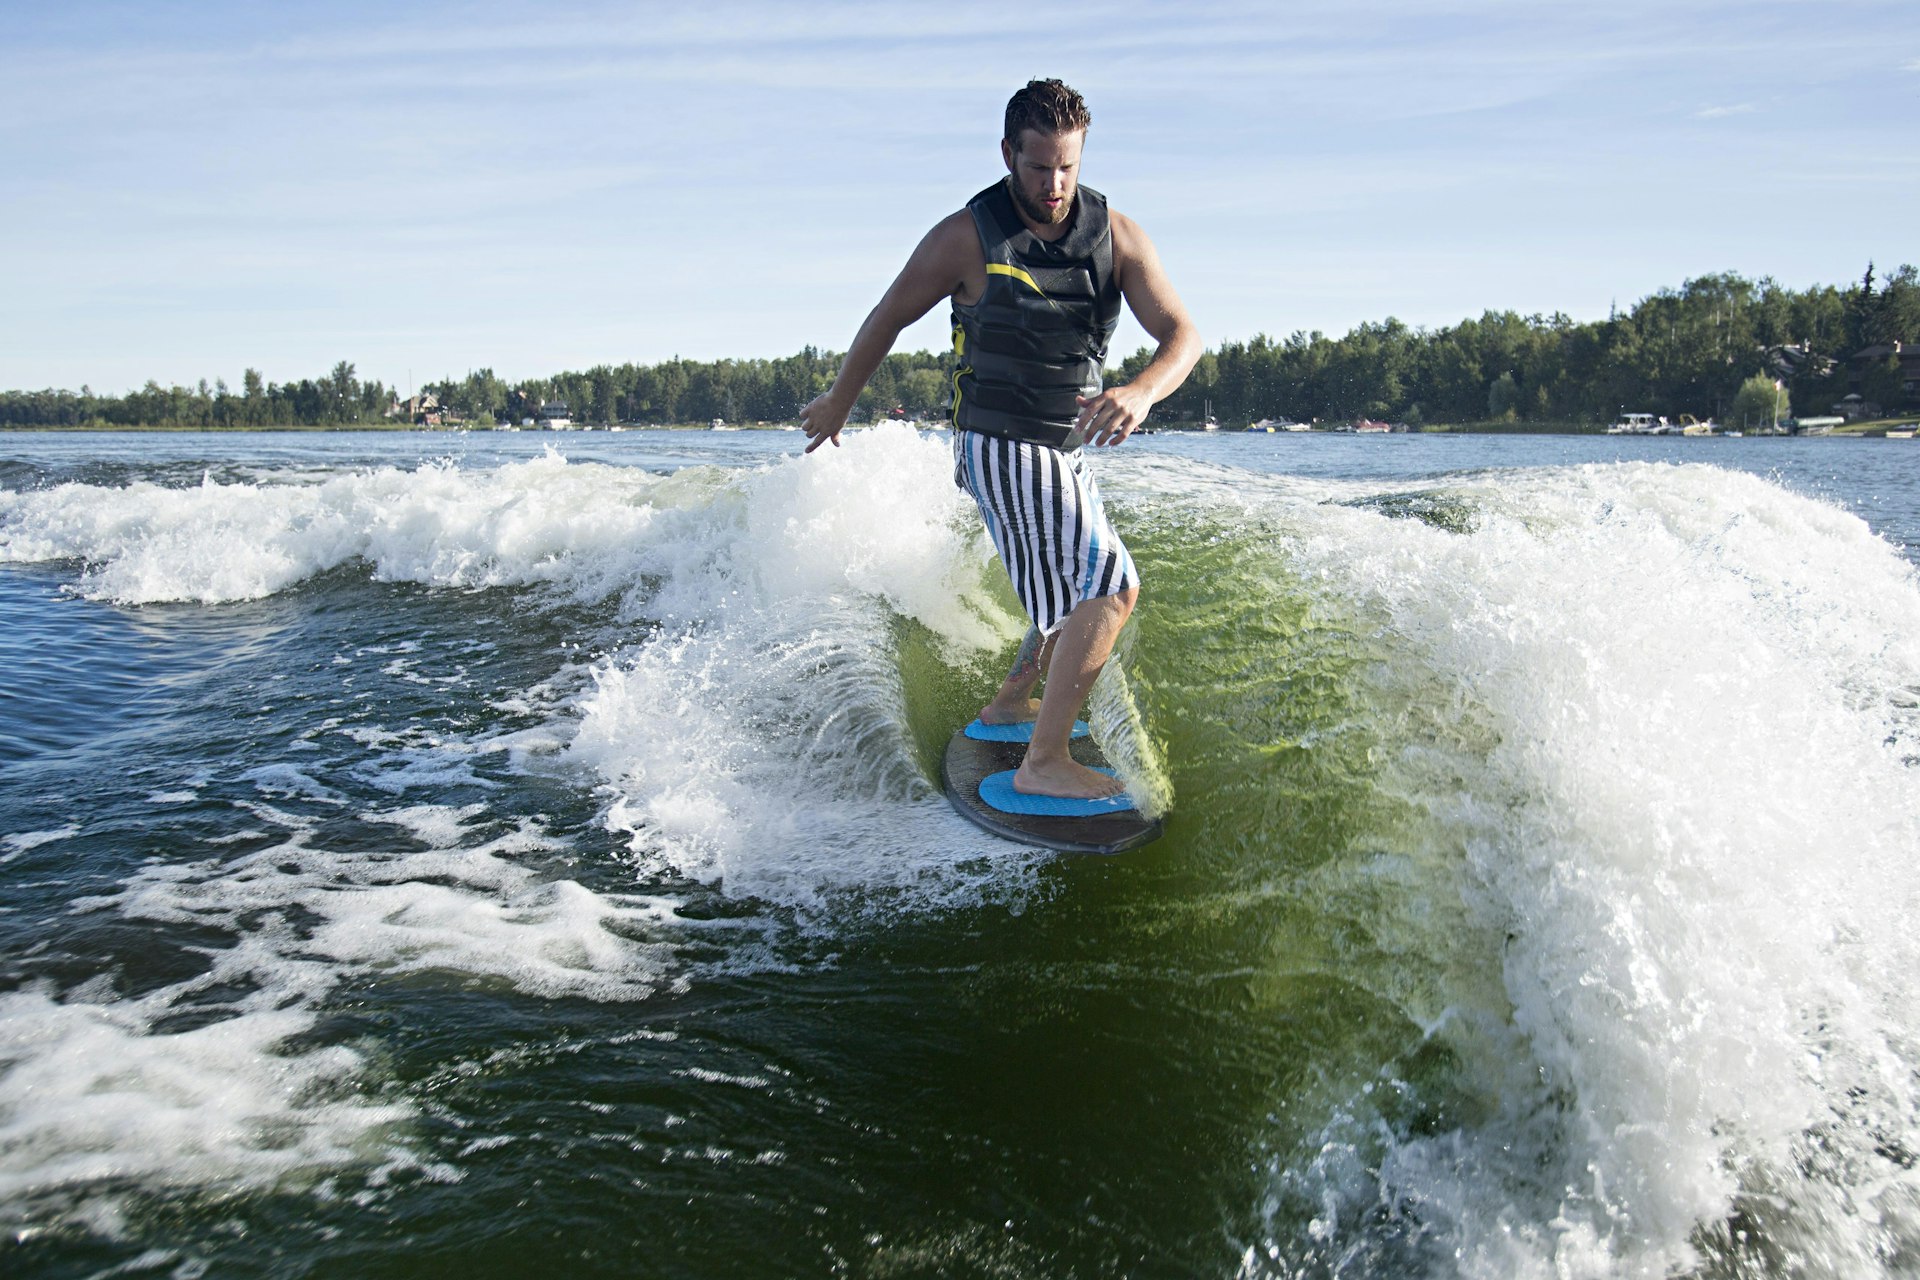 Wakesurfing relies on the wake created by a speedboat’s hull. Image by Aaron Black / Getty